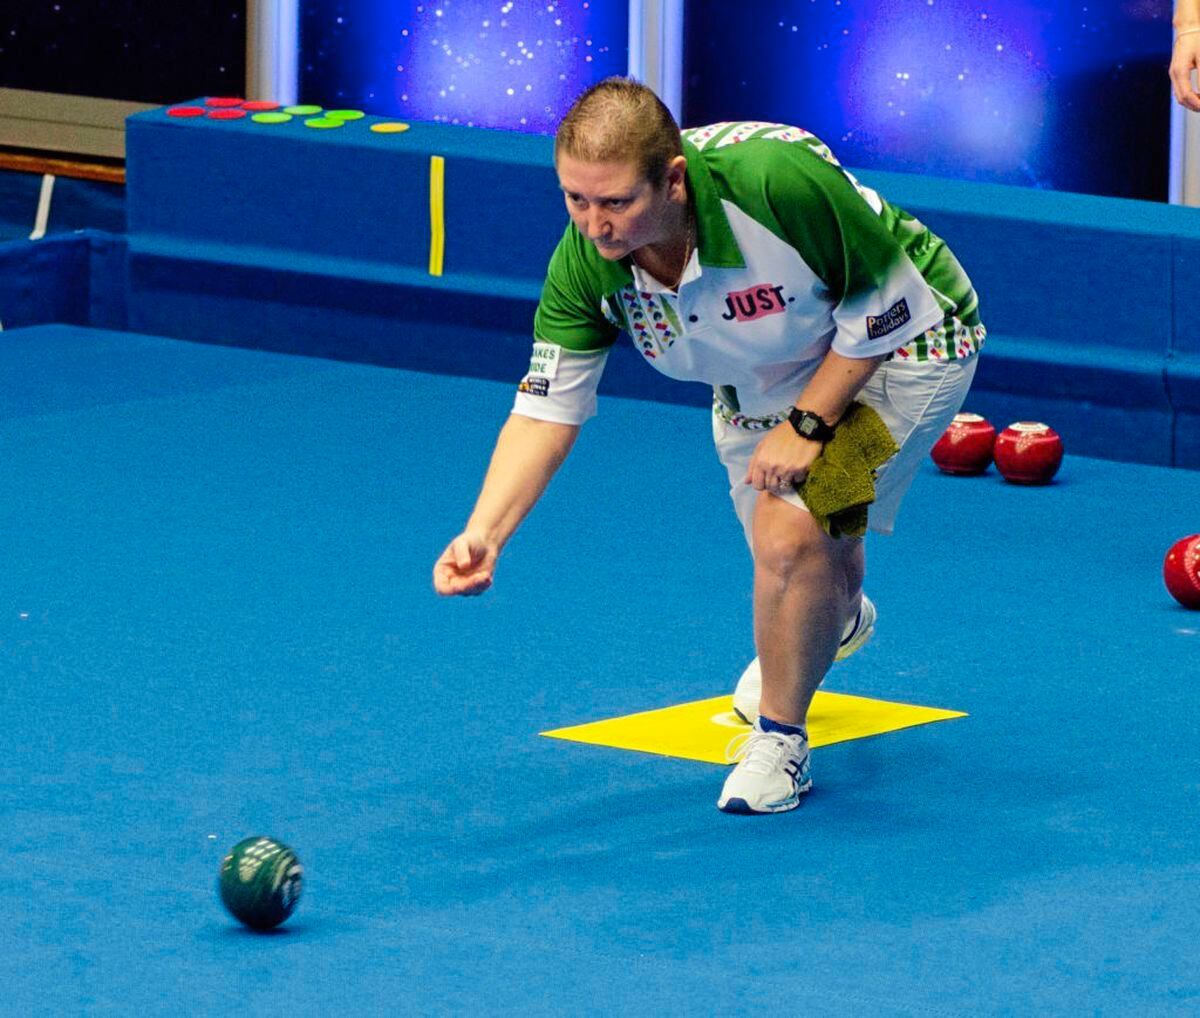 Despite being able to play in the green of Guernsey, Alison Merrien was unable to prevent an inspired Julie Forrest from winning the World Indoor Bowls ladies’ singles final yesterday. (Picture from World Bowls Tour website, 23711492)